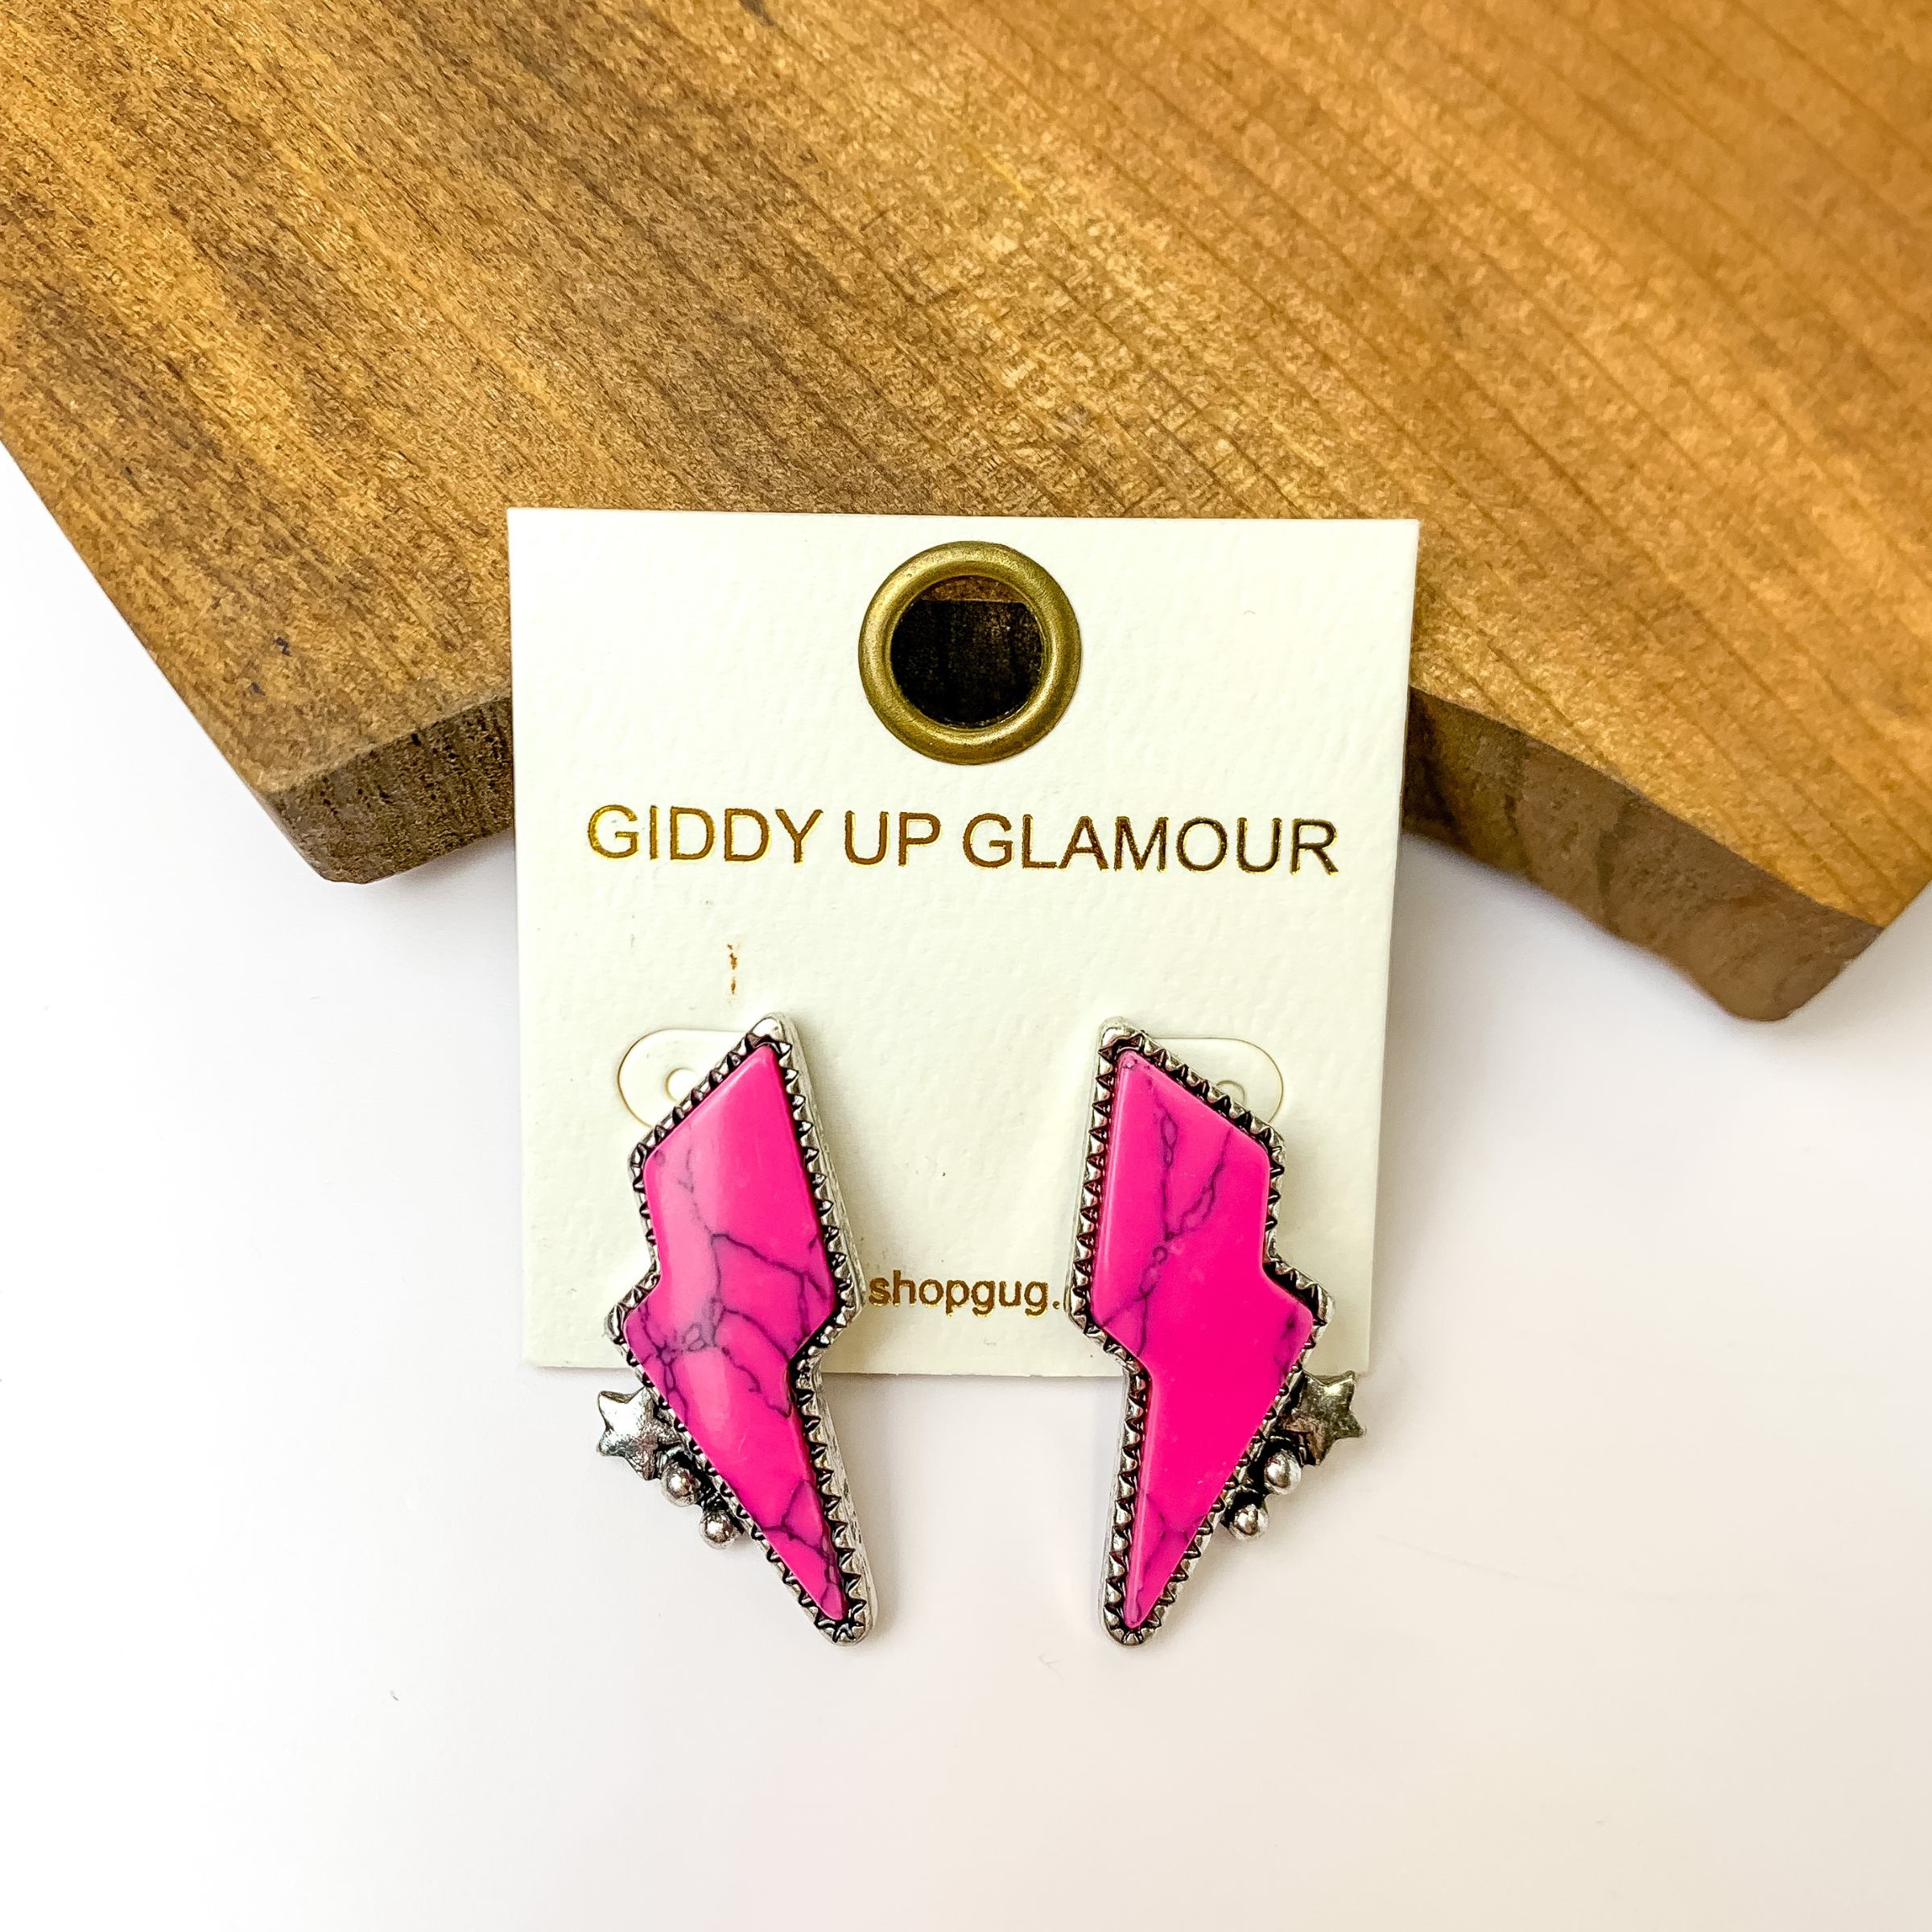 Driving Down Lightning Bolt Stone Post Earrings in Hot Pink with Silver Detailing. Pictured on a white background sitting against a piece of wood.